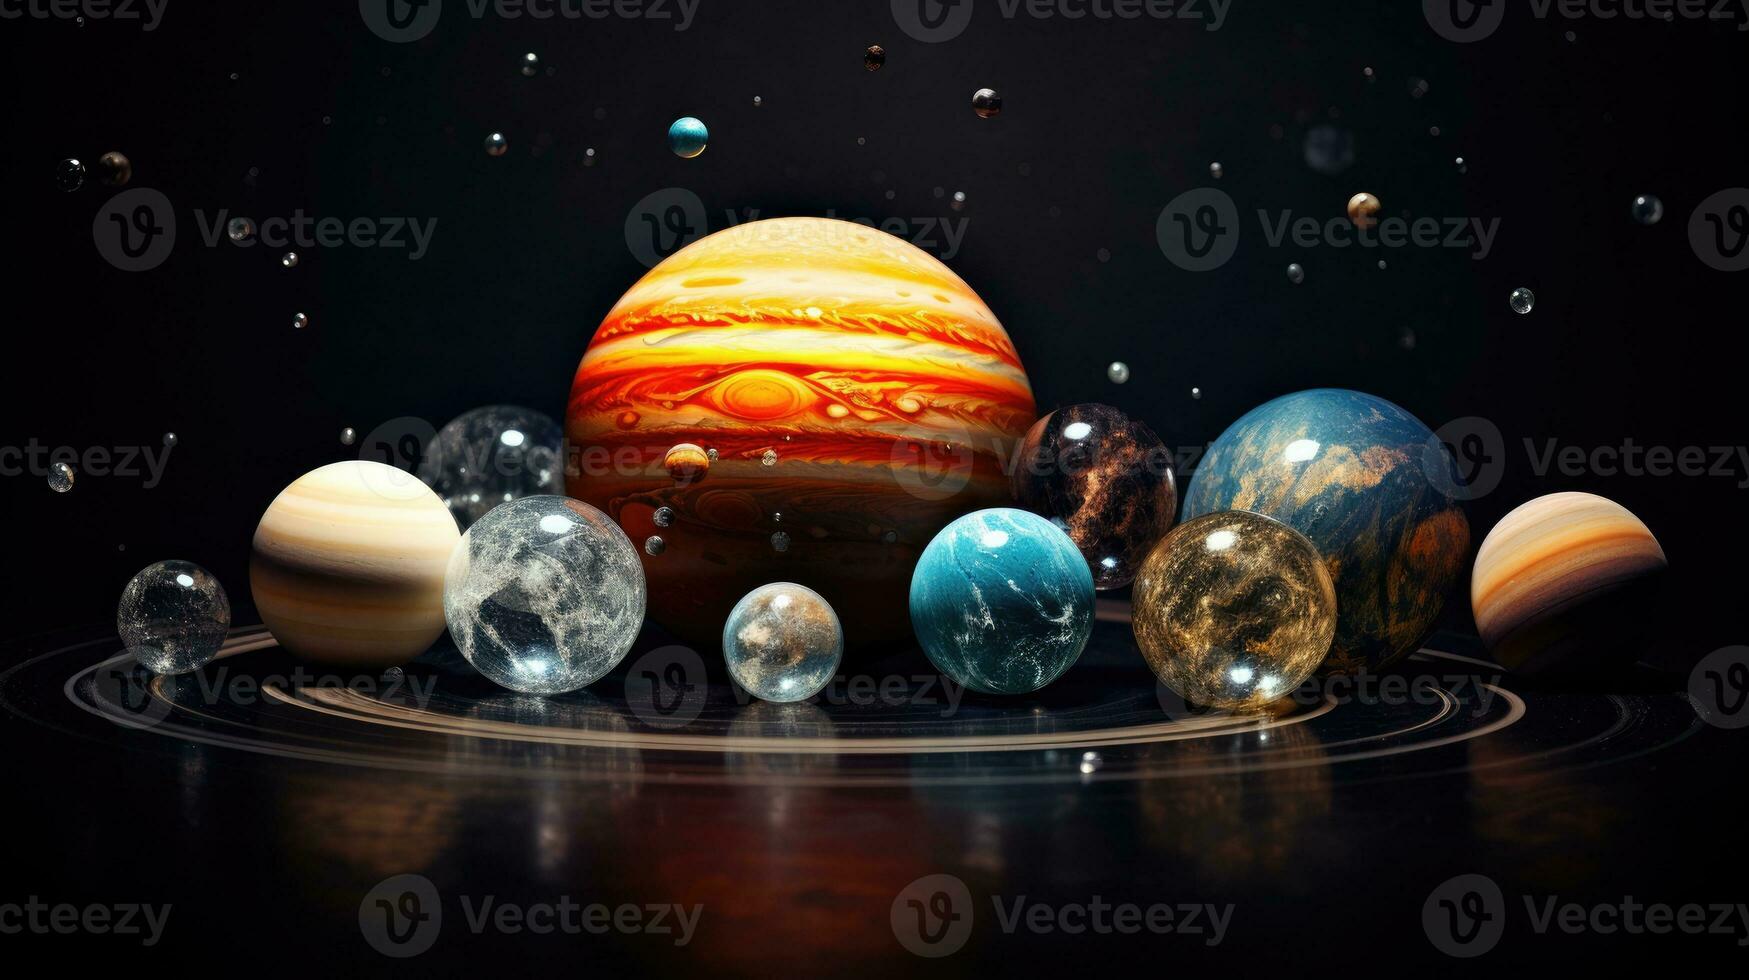 Astrology astronomy planets on black photo